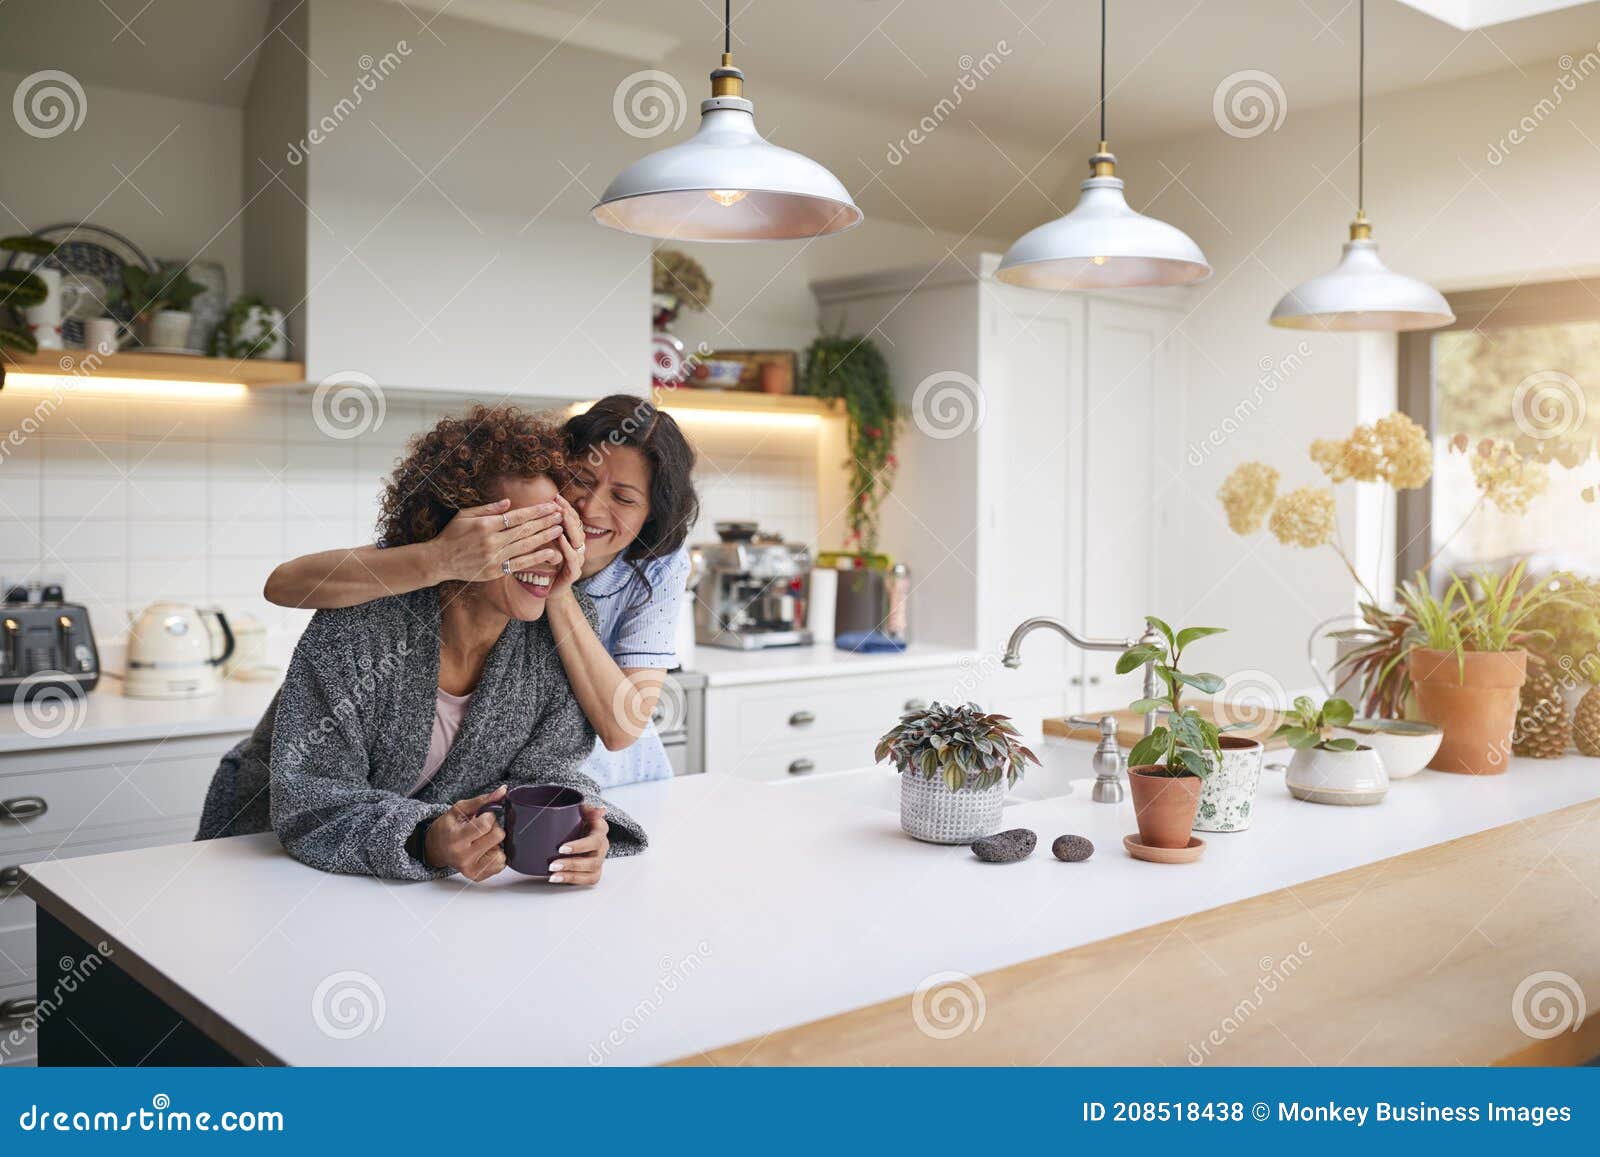 Mature Woman Wearing Pyjamas Surprising Same Sex Partner in Kitchen at Home Together Stock Photo